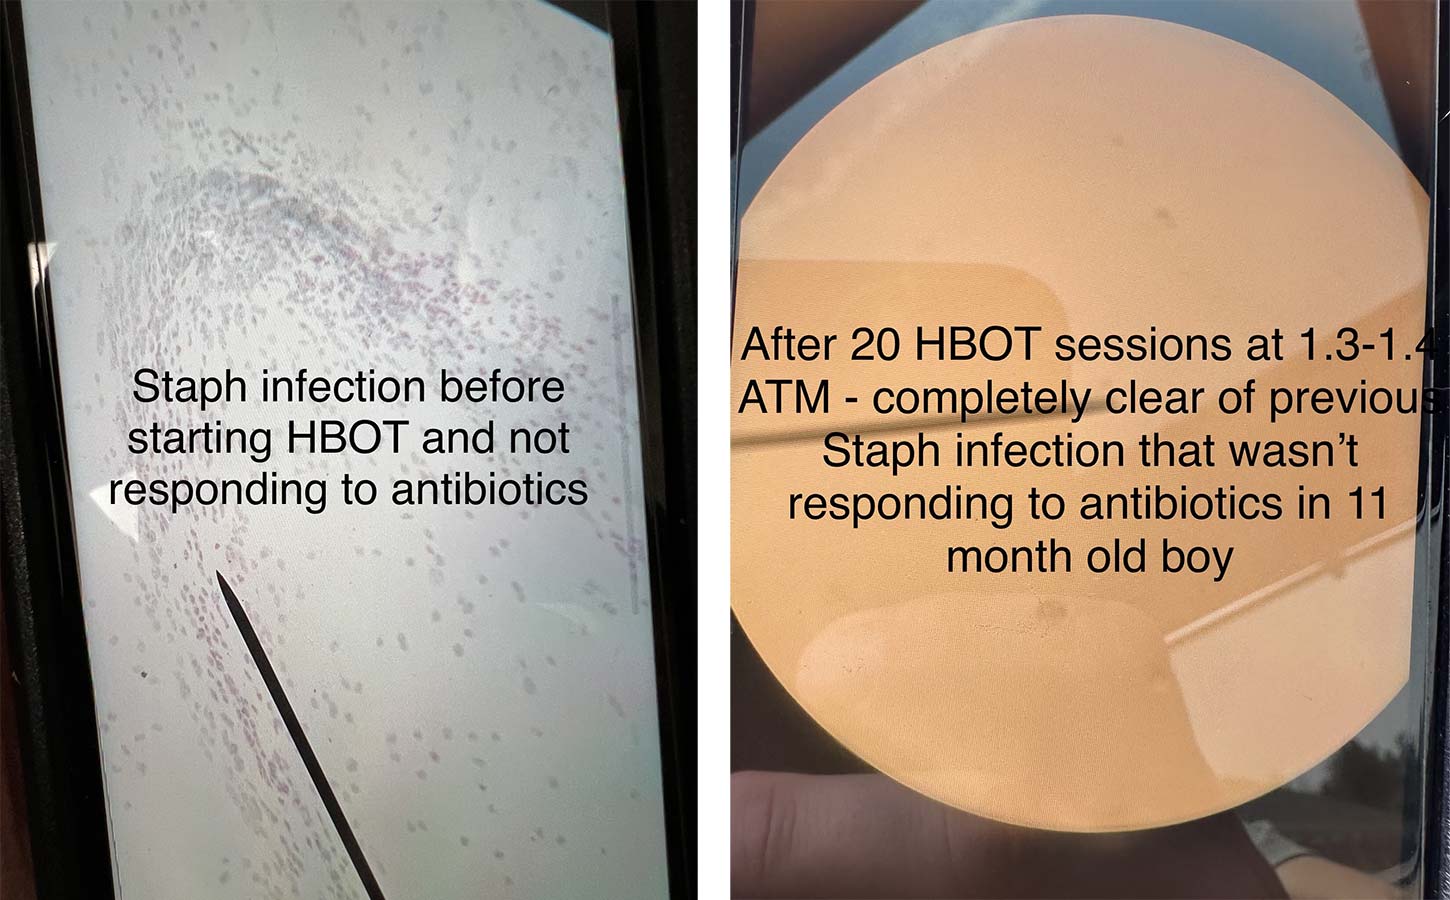 staph infection before and after hbot therapy